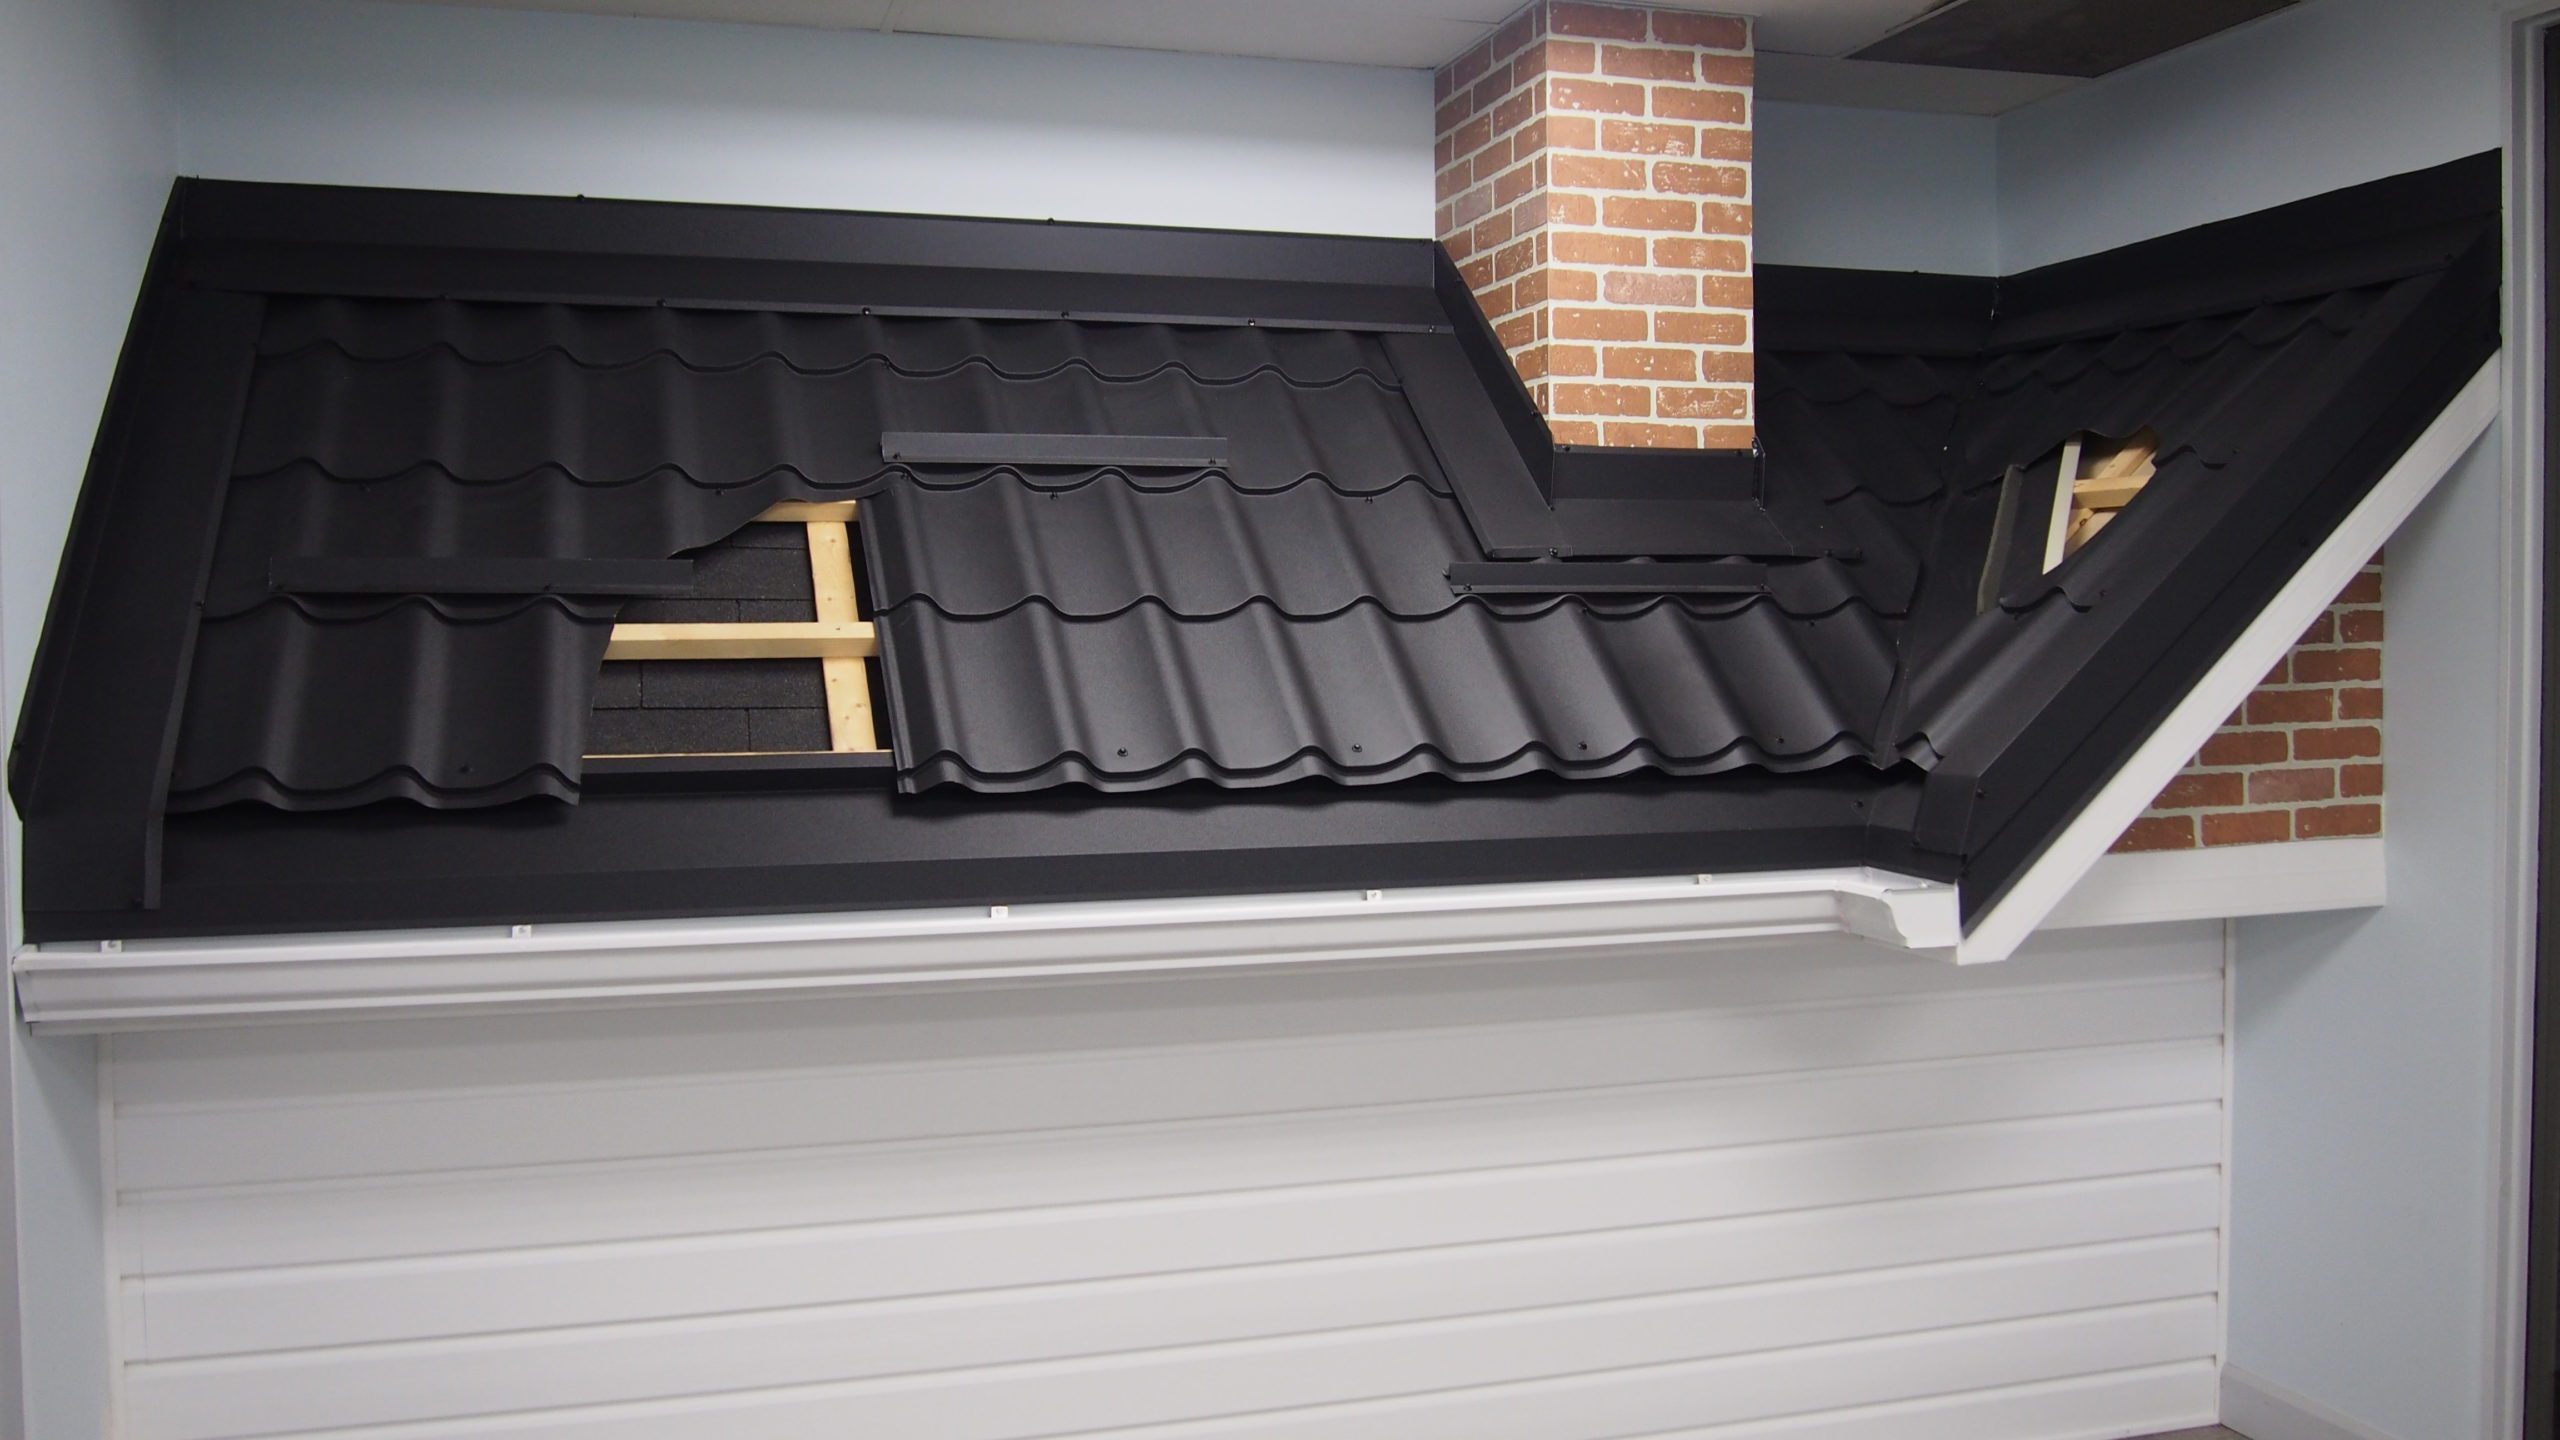 Metal Roofing Materials on mock roof